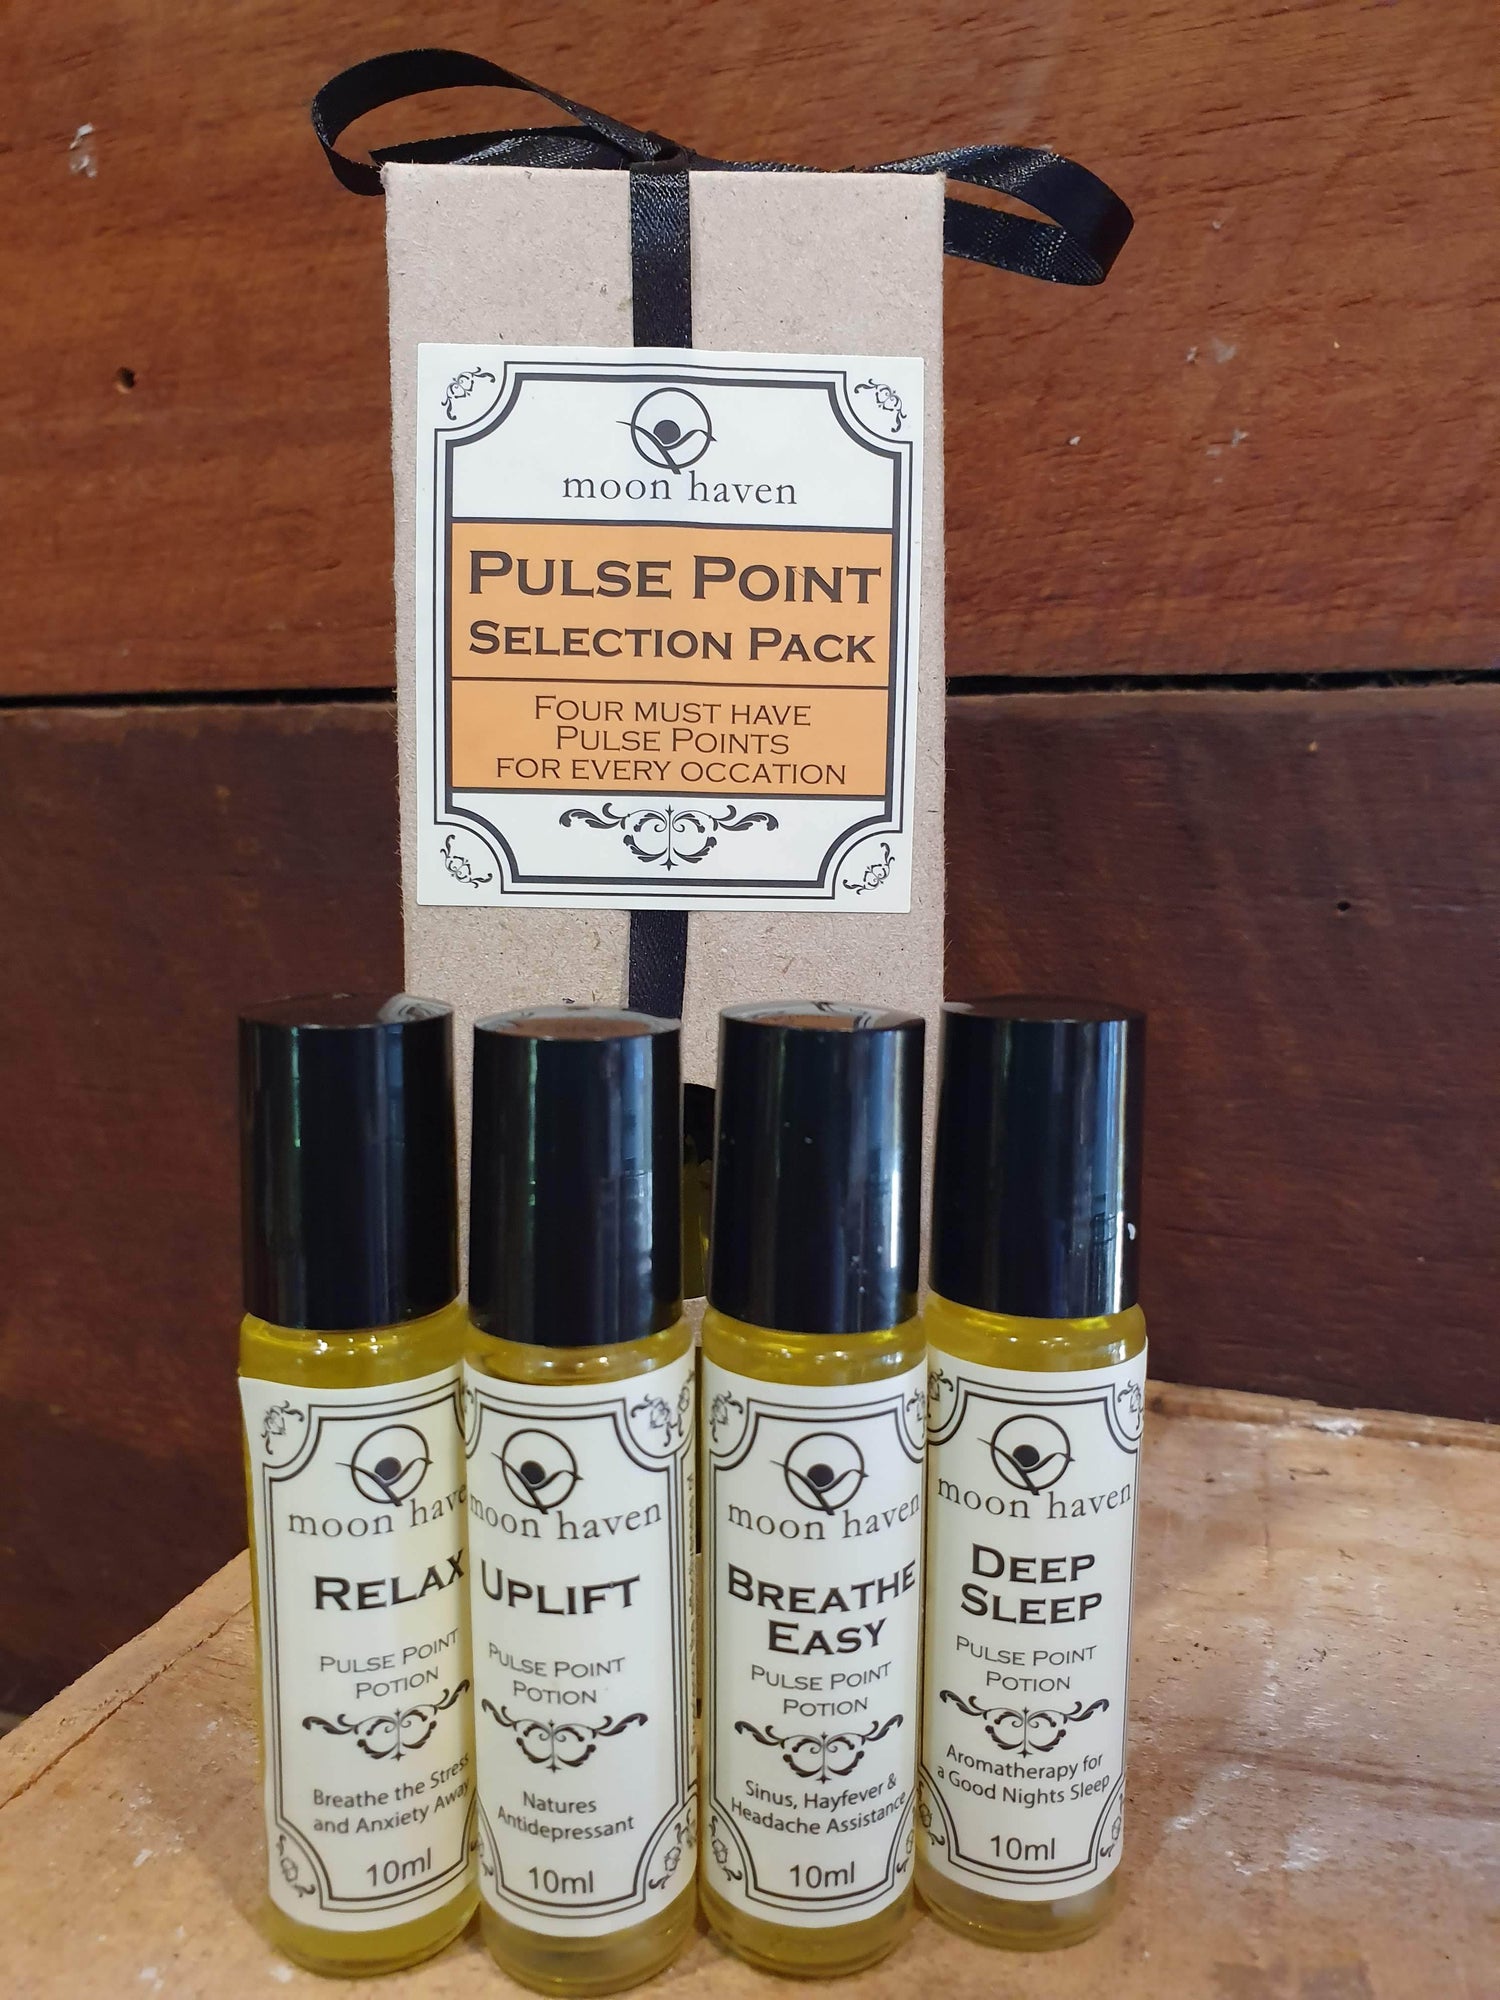 Pulse Point Potions